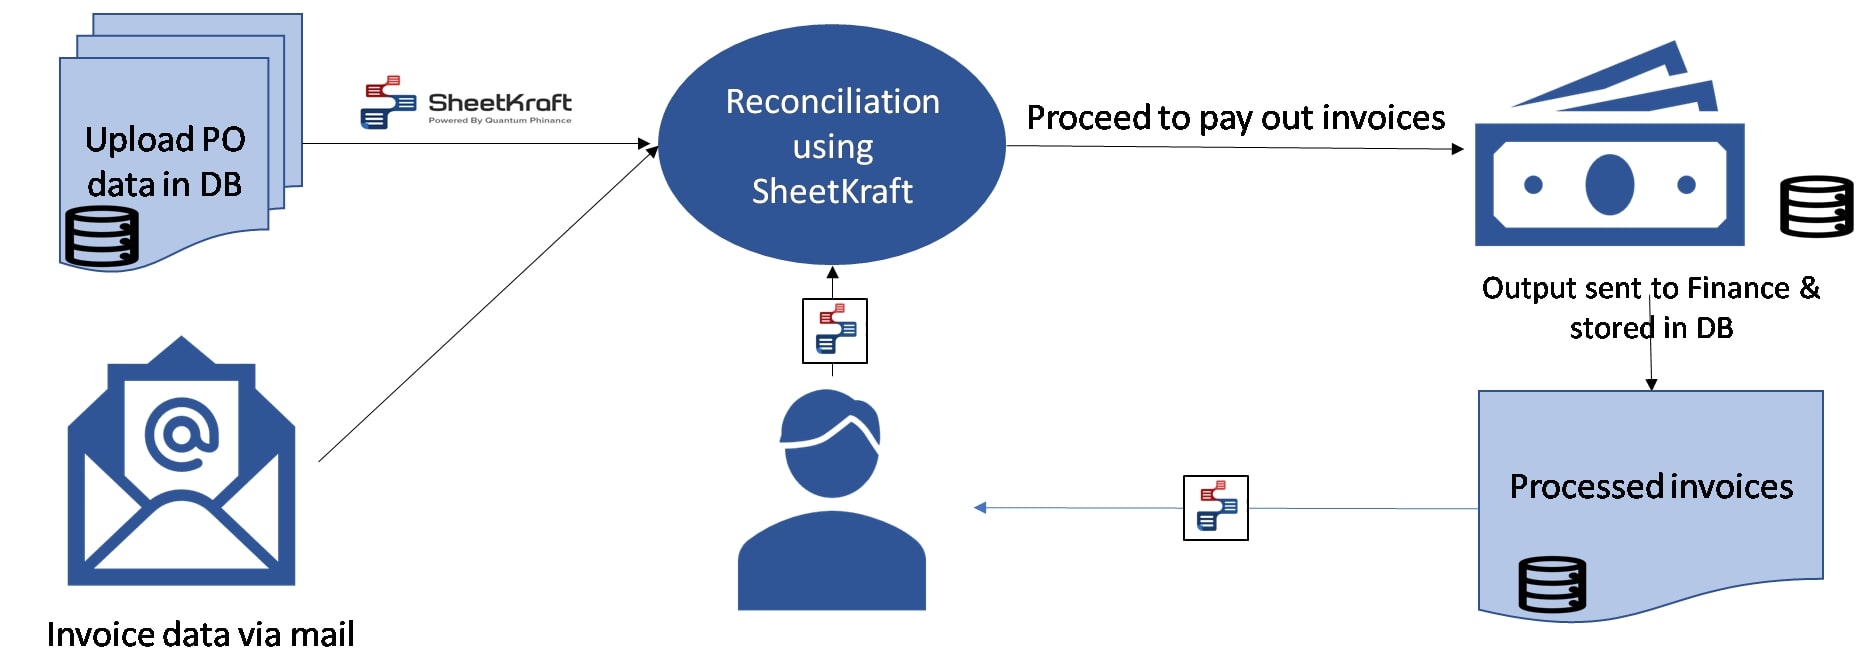 bank reconciliation system software